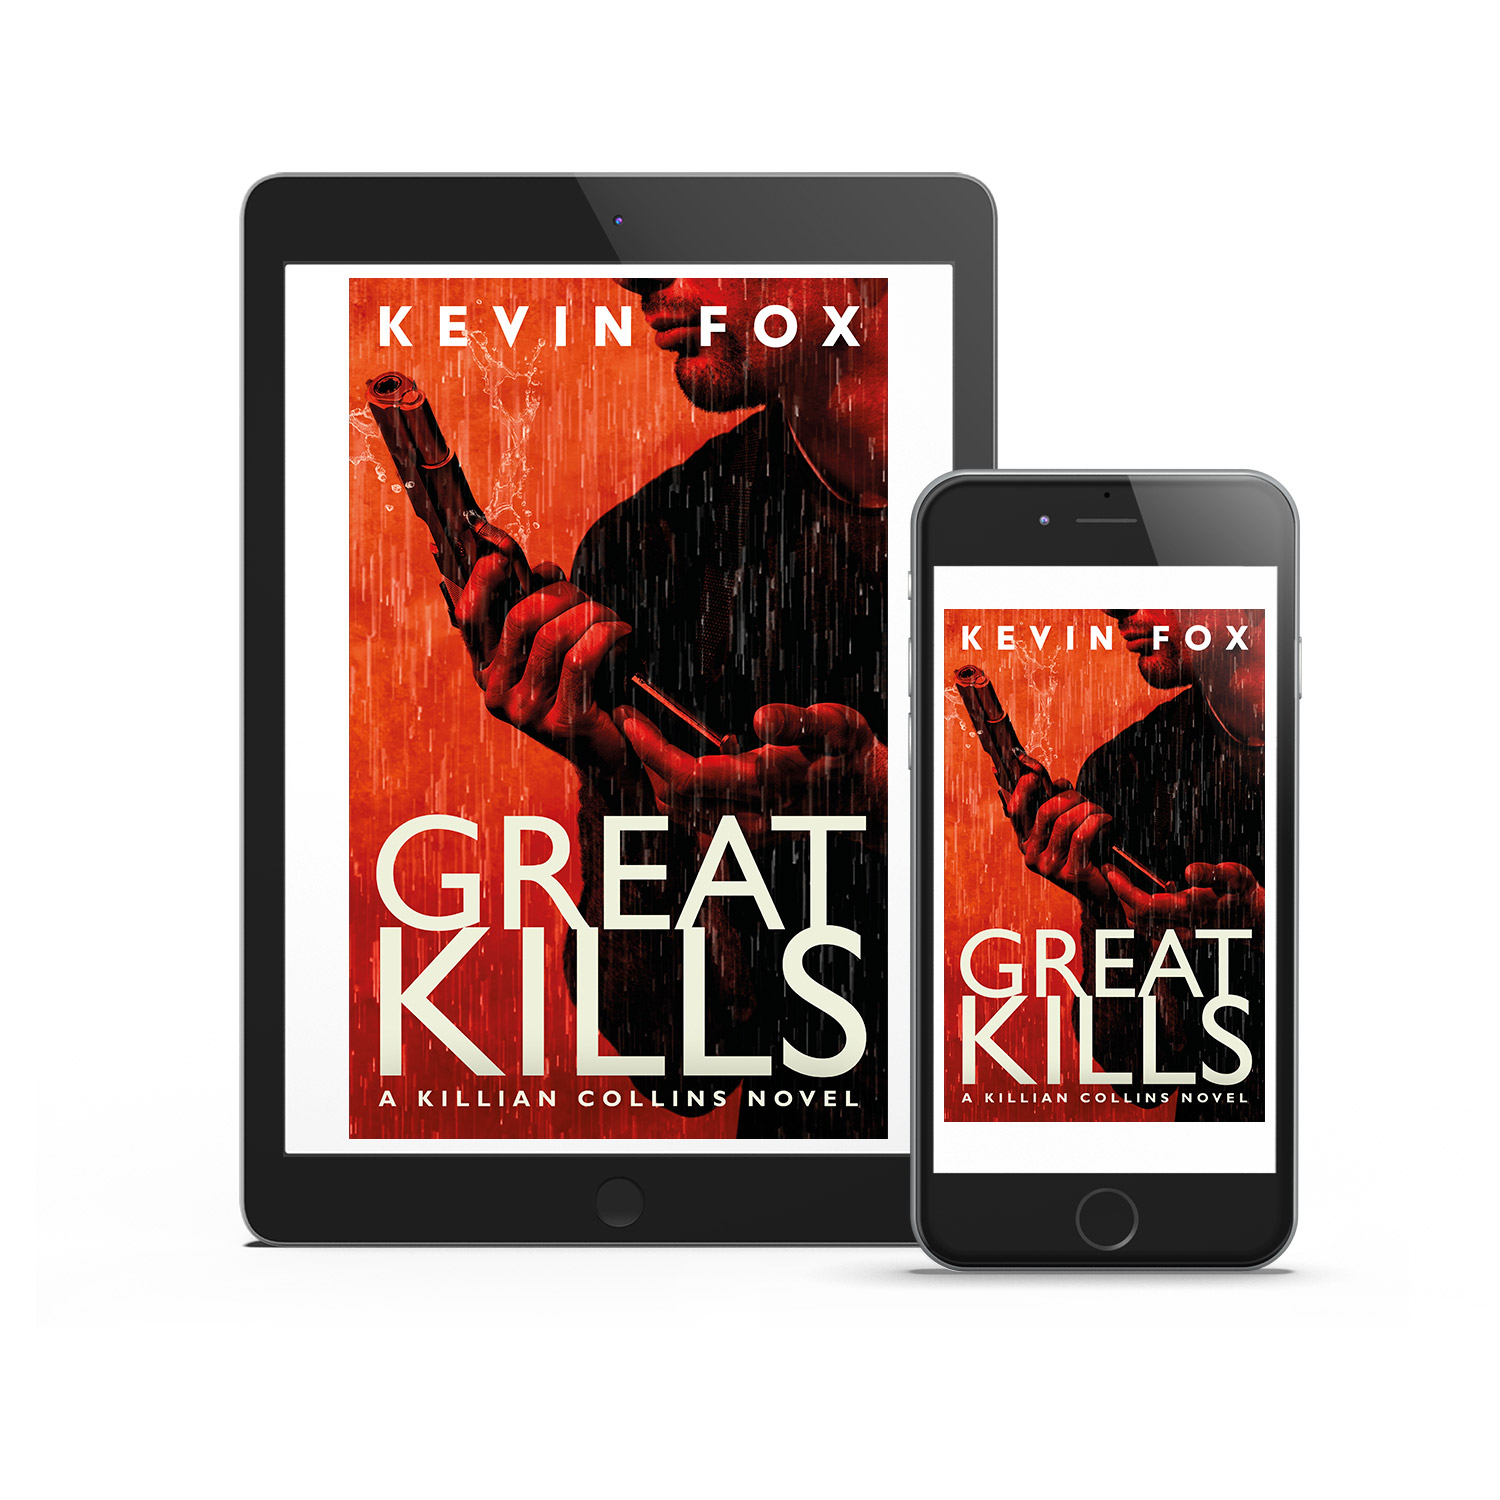 'Great Kills' is a great, gritty, character-led thriller. The author is Kevin Fox. The book cover design and interior formatting are by Mark Thomas. To learn more about what Mark could do for your book, please visit coverness.com.